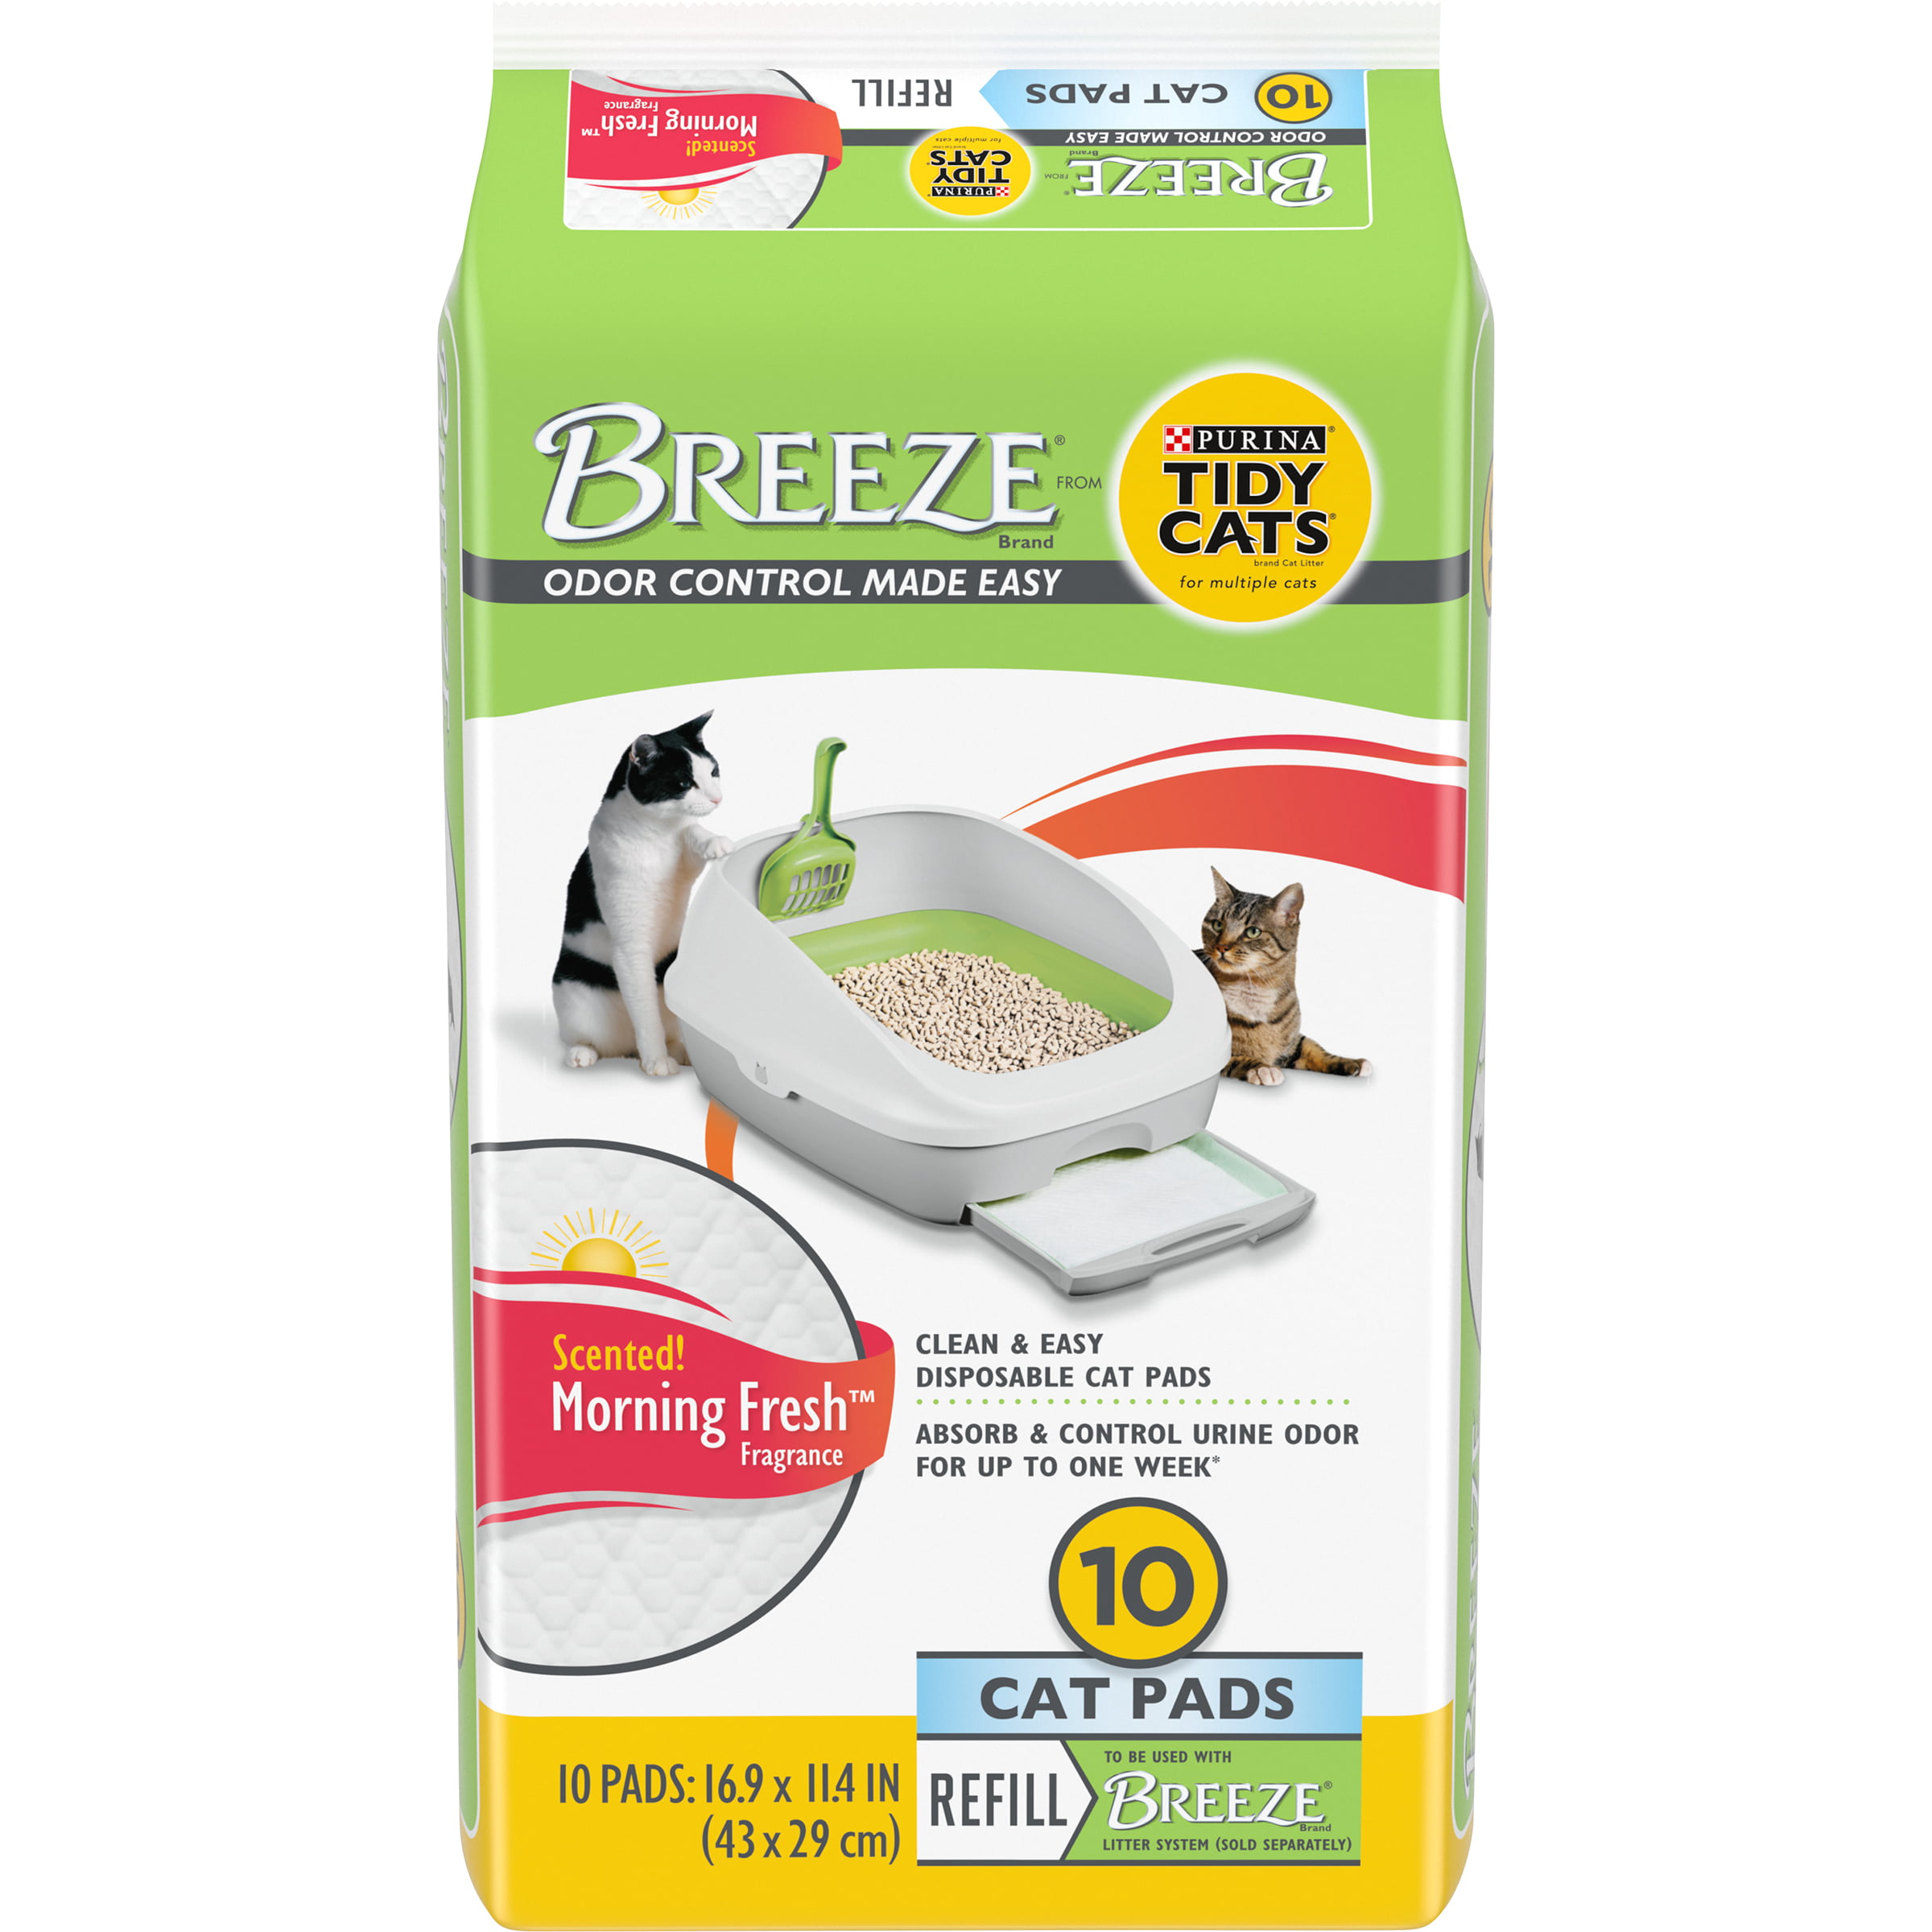 Purina Tidy Cats Litter System, Breeze Morning Fresh Fragrance Multi